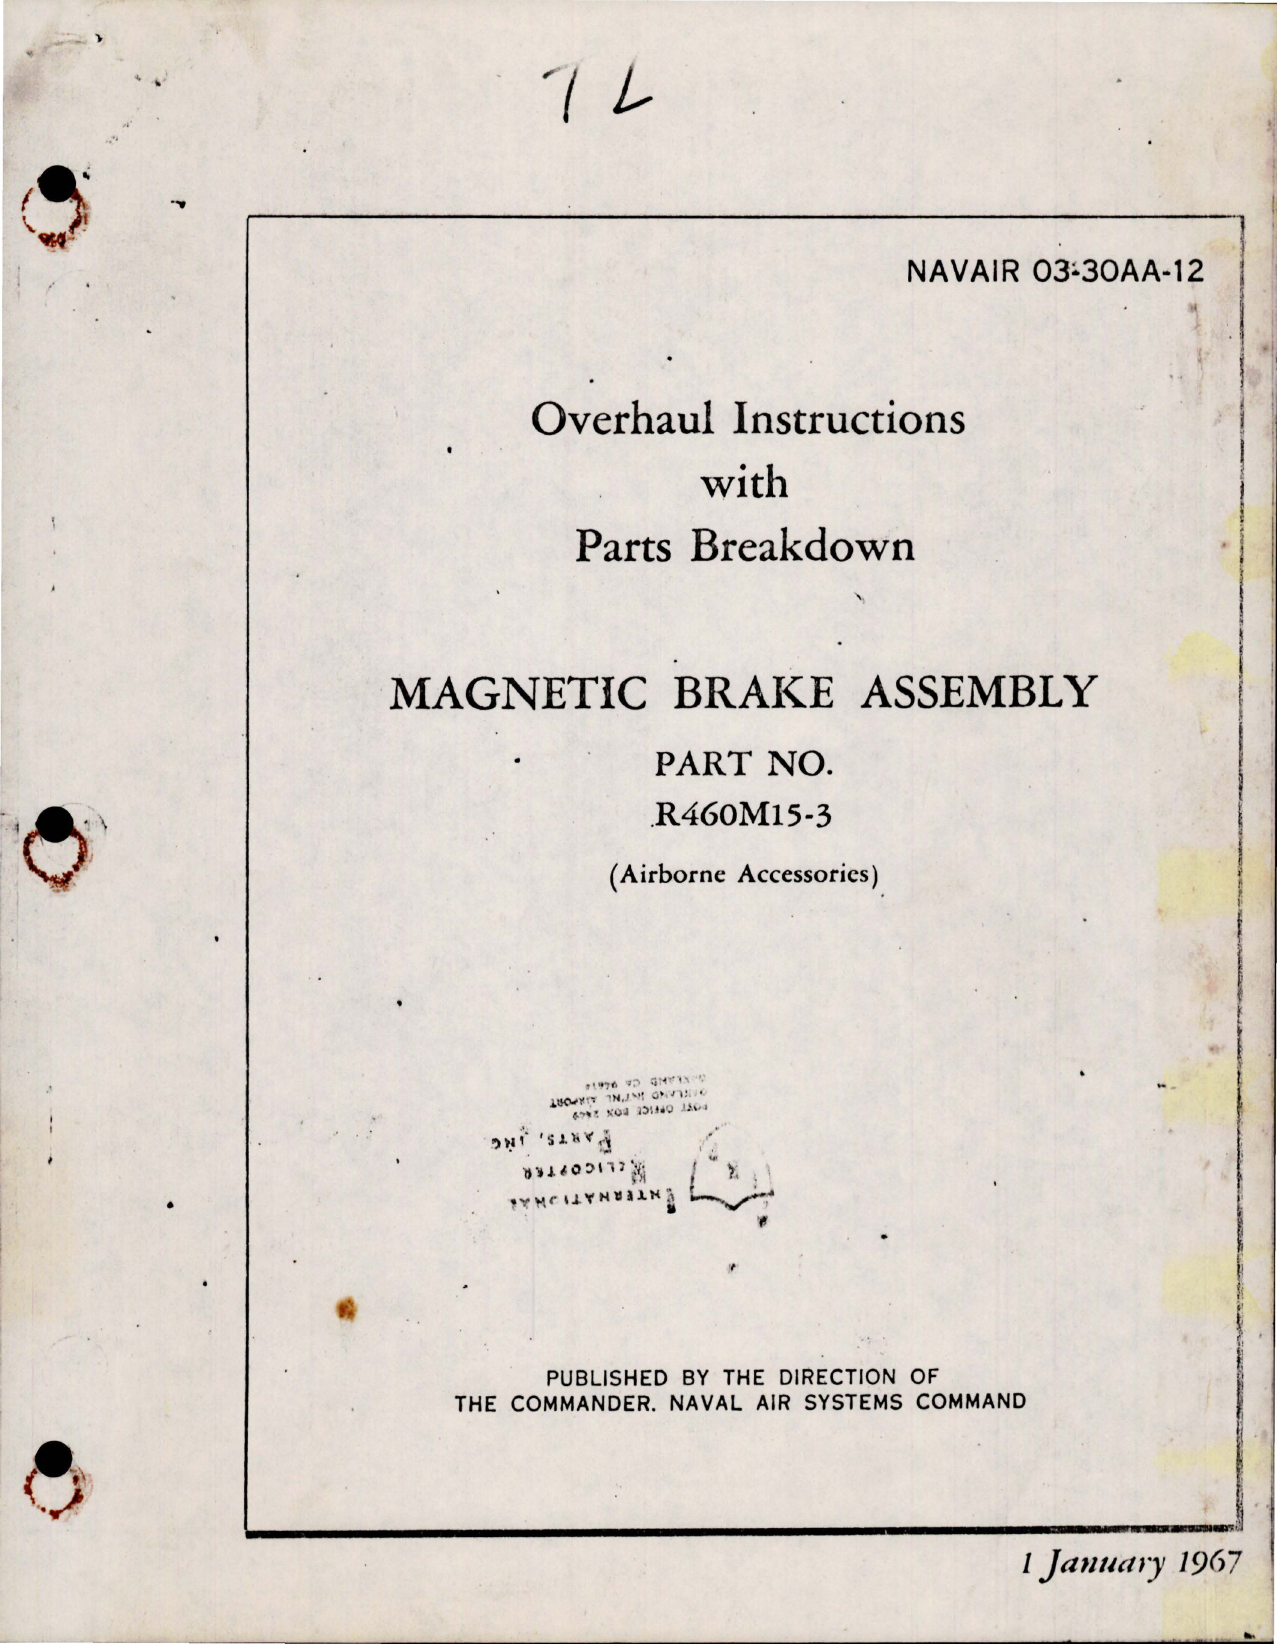 Sample page 1 from AirCorps Library document: Overhaul Instructions with Parts Breakdown for Magnetic Brake Assembly - Part R460M15-3